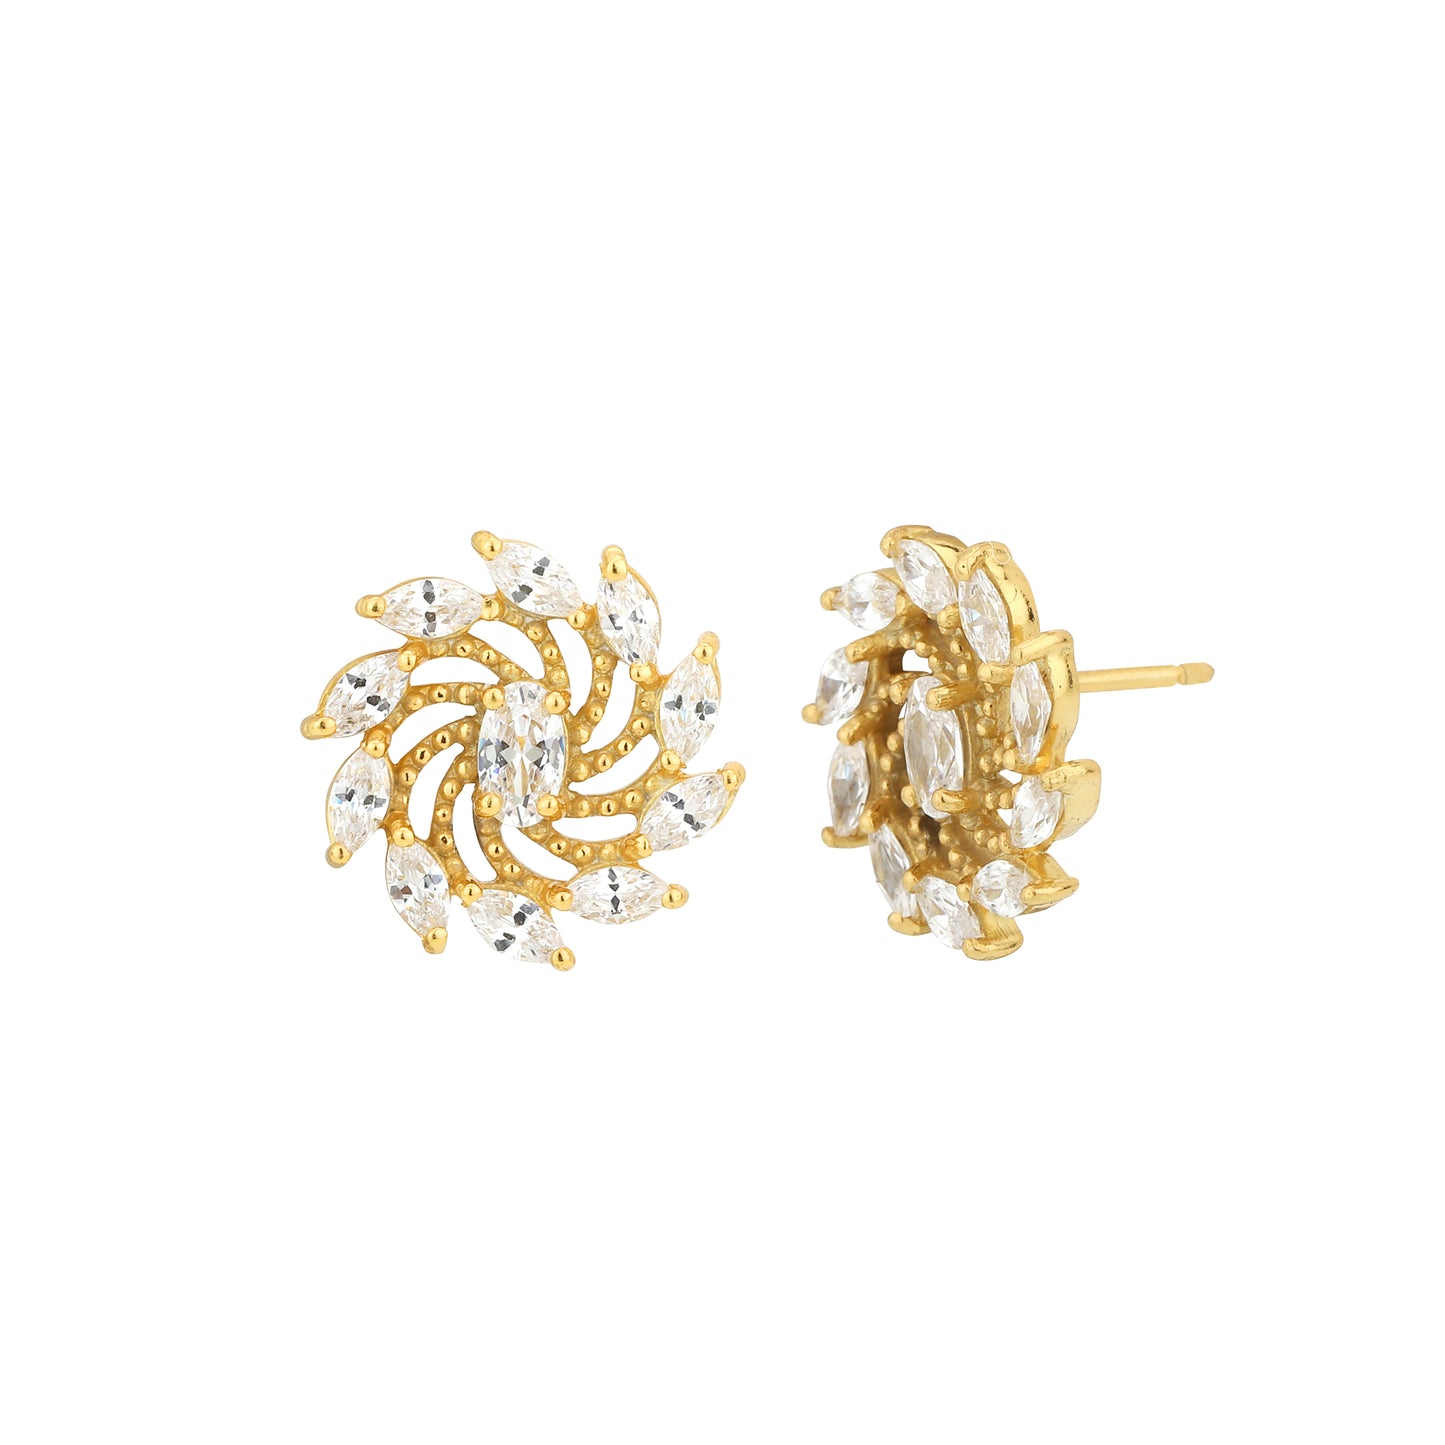 Carlton London Gold and White Contemporary Stud Earrings